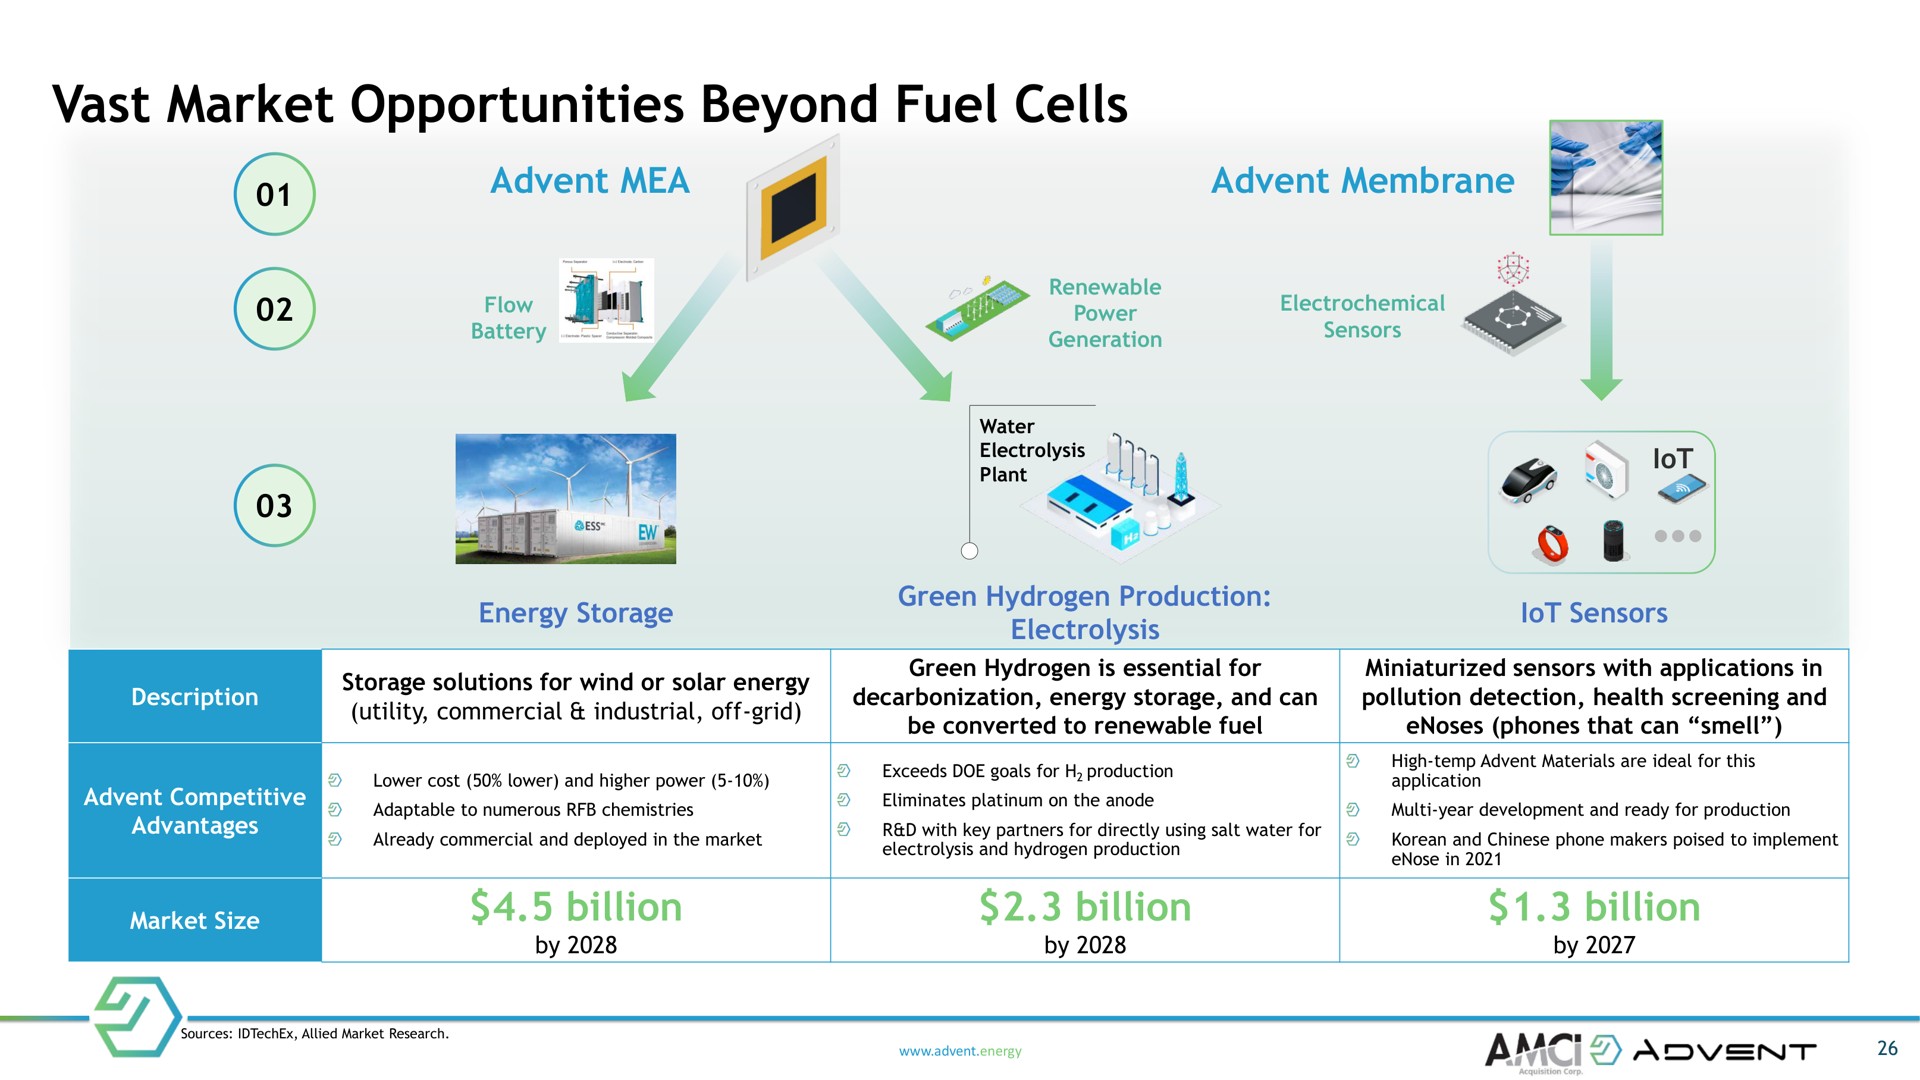 vast market opportunities beyond fuel cells billion billion billion or i renewable paver generation electrochemical sensors electrolysis plant energy storage green hydrogen production electrolysis lot so lot sensors eaten storage solutions for wind or solar energy utility commercial industrial off grid green hydrogen is essential for decarbonization energy storage and can be converted to renewable sensors with applications in pollution detection health screening and phones that can smell lower cost lower and higher power exceeds doe goals for production eliminates platinum on the anode adaptable to numerous chemistries advantages already commercial and deployed in the with key partners for directly using salt water for electrolysis and hydrogen production high temp materials are ideal for this application year development and ready for production and phone makers poised to implement in size by by by allied research energy | Advent